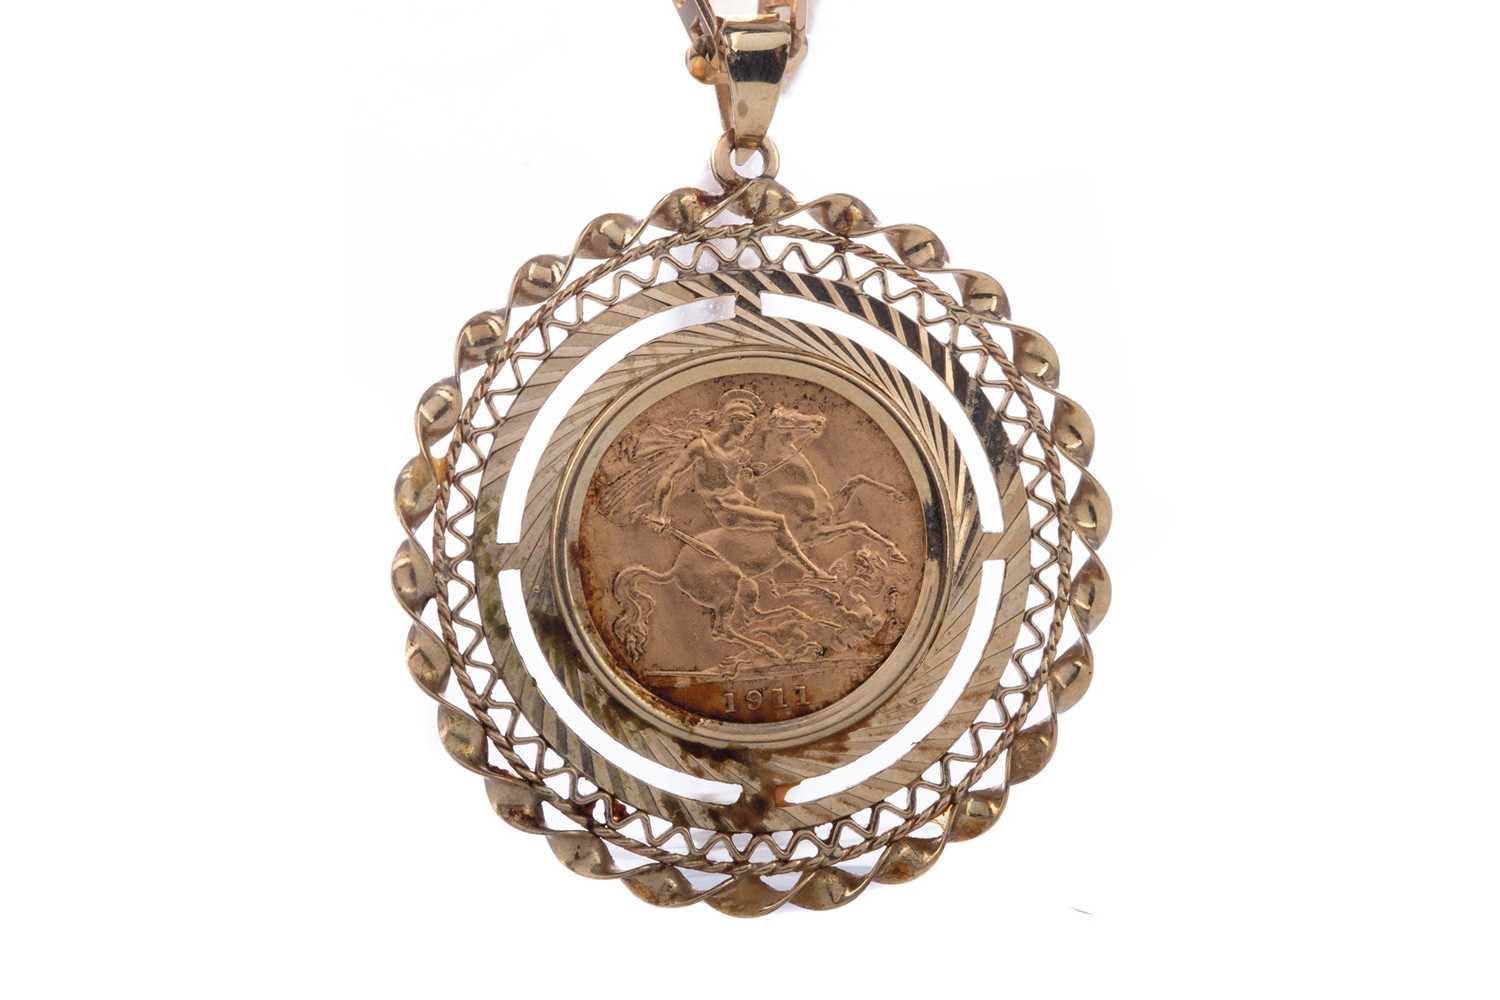 Lot 6 - A GOLD HALF SOVEREIGN PENDANT ON CHAIN